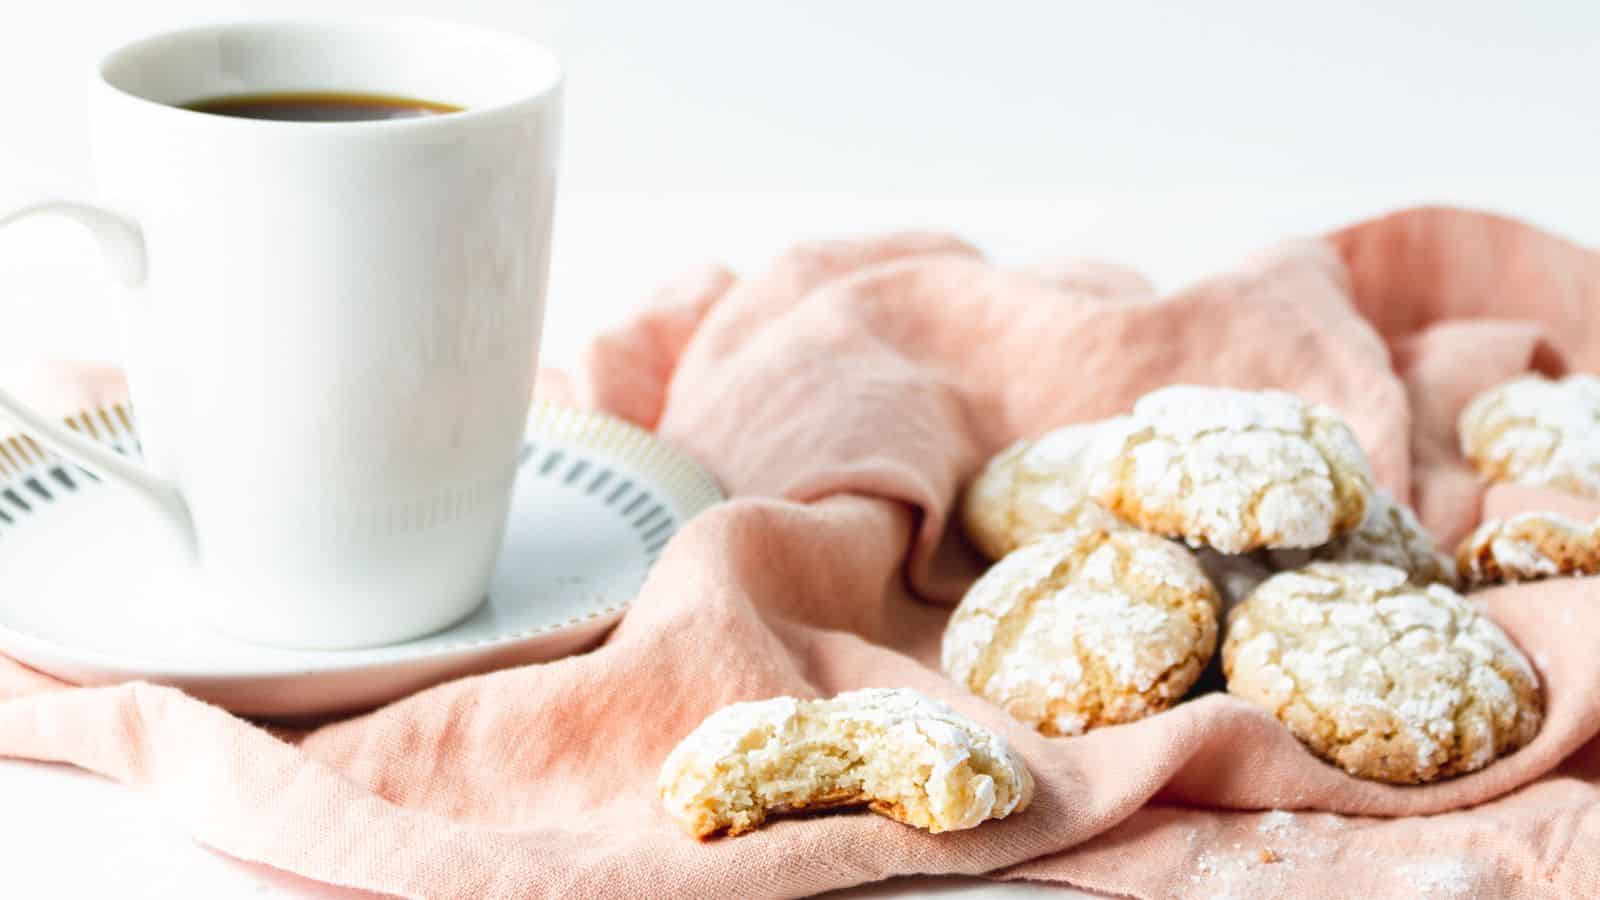 <p>Our Vegan Amaretti Cookies are crisp, sweet, and completely delicious. They bring the traditional Italian almond flavor in a vegan-friendly form. Perfect with a cup of coffee or as an after-dinner treat. These cookies are sure to please everyone, vegan or not.<br><strong>Get the Recipe: </strong><a href="https://twocityvegans.com/vegan-amaretti-cookies/?utm_source=msn&utm_medium=page&utm_campaign=">Vegan Amaretti Cookies</a></p>